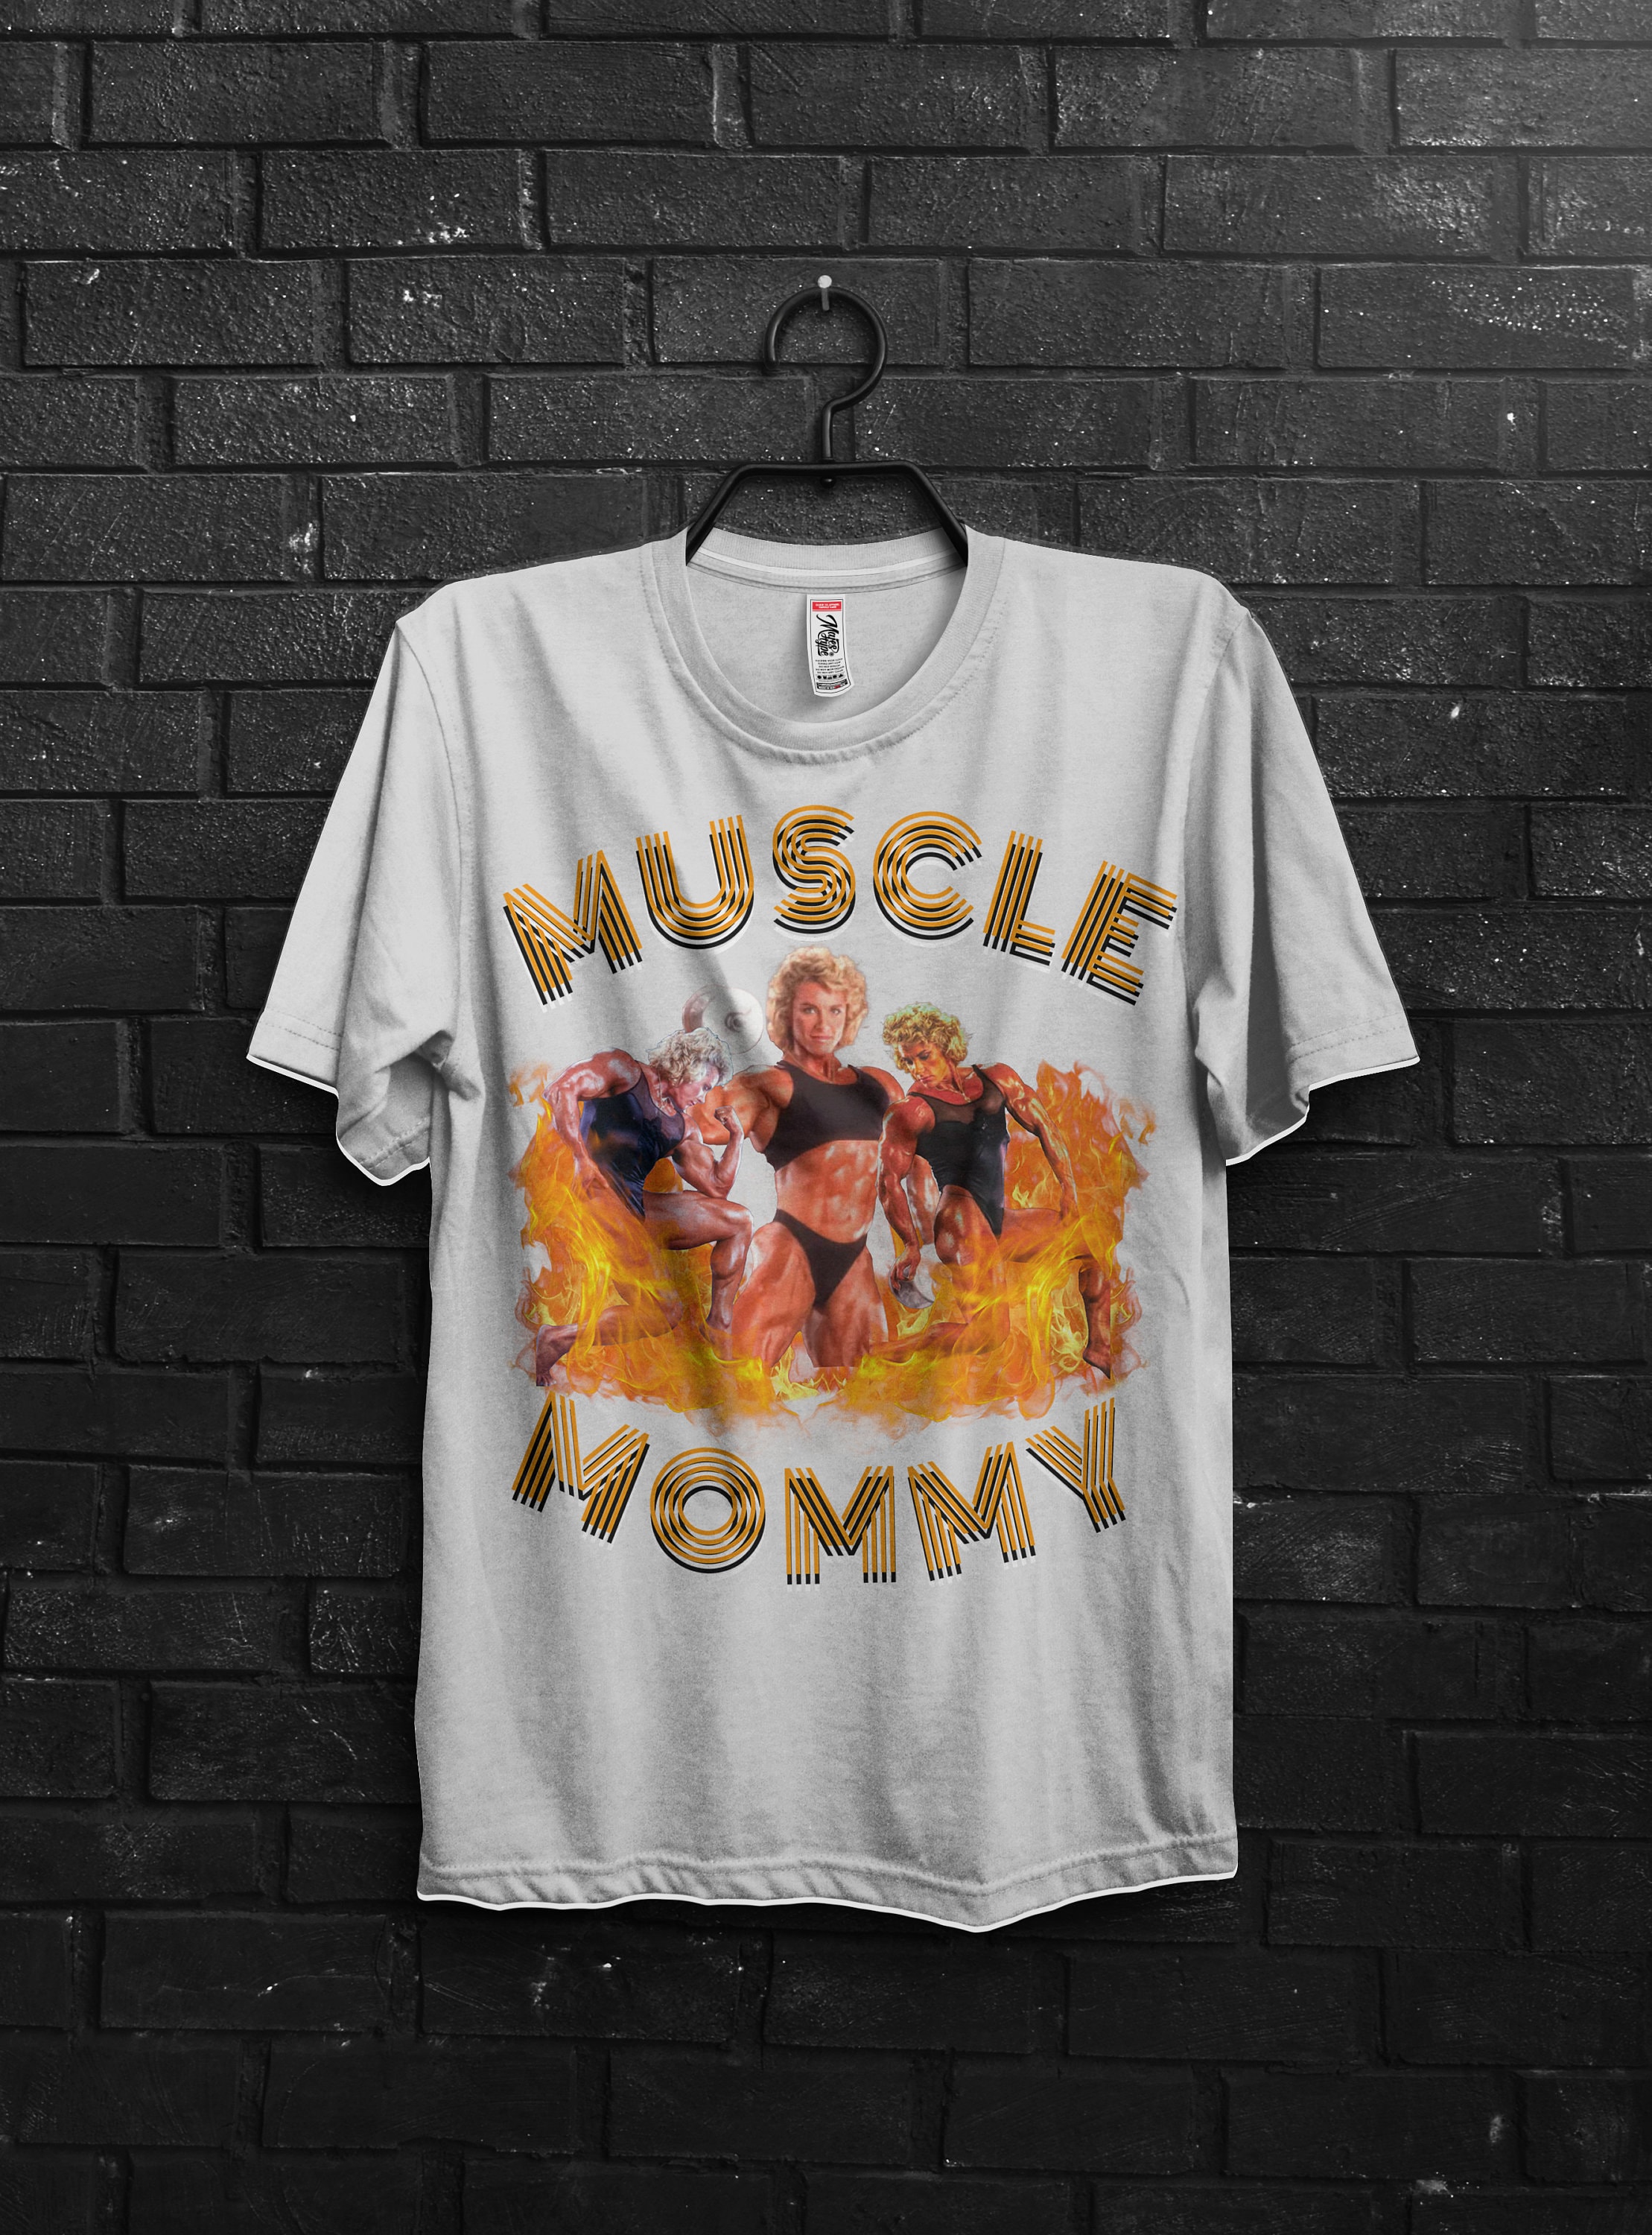 Retro Muscle Mommy Gym T shirt,Oversized Fitness Shirt for Women,Vintage Muscle Mommy Gym Shirt,Bodybuilder and Weightlifting Gift,Gym Mommy 1476274208